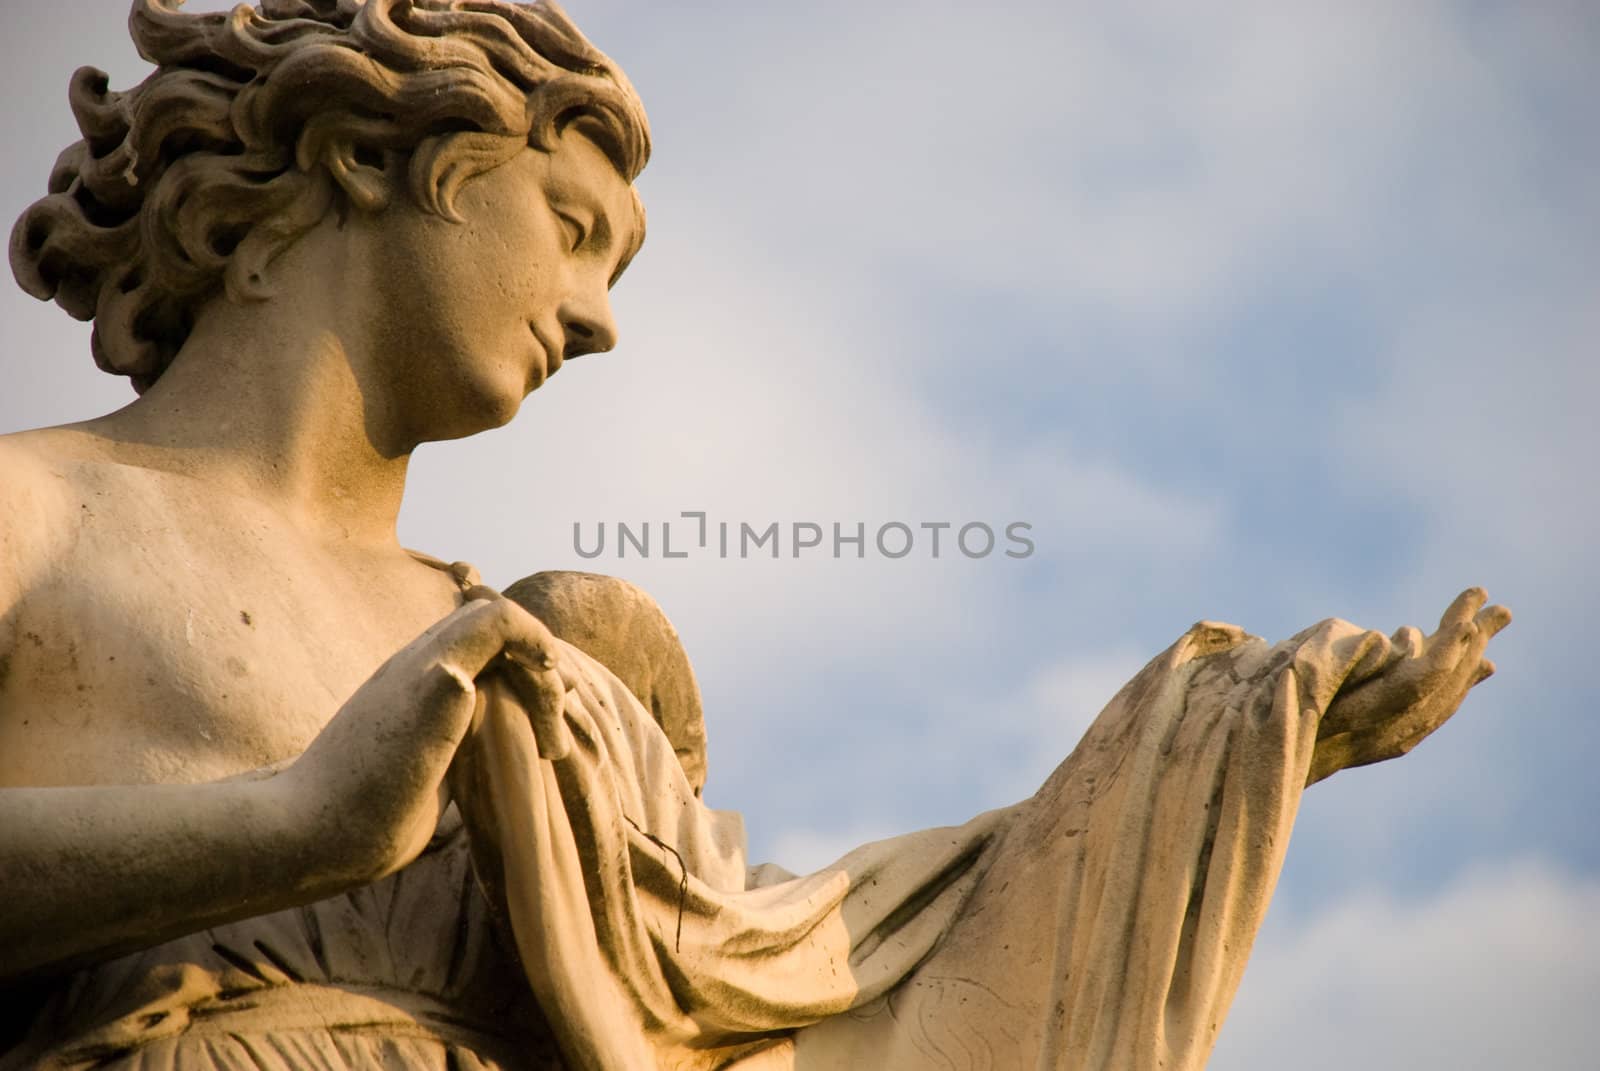 Angel with the Sudarium (Veronicas Veil). Situated on the bridge of Castel Sant'Angelo, Rome Italy. XV Century.